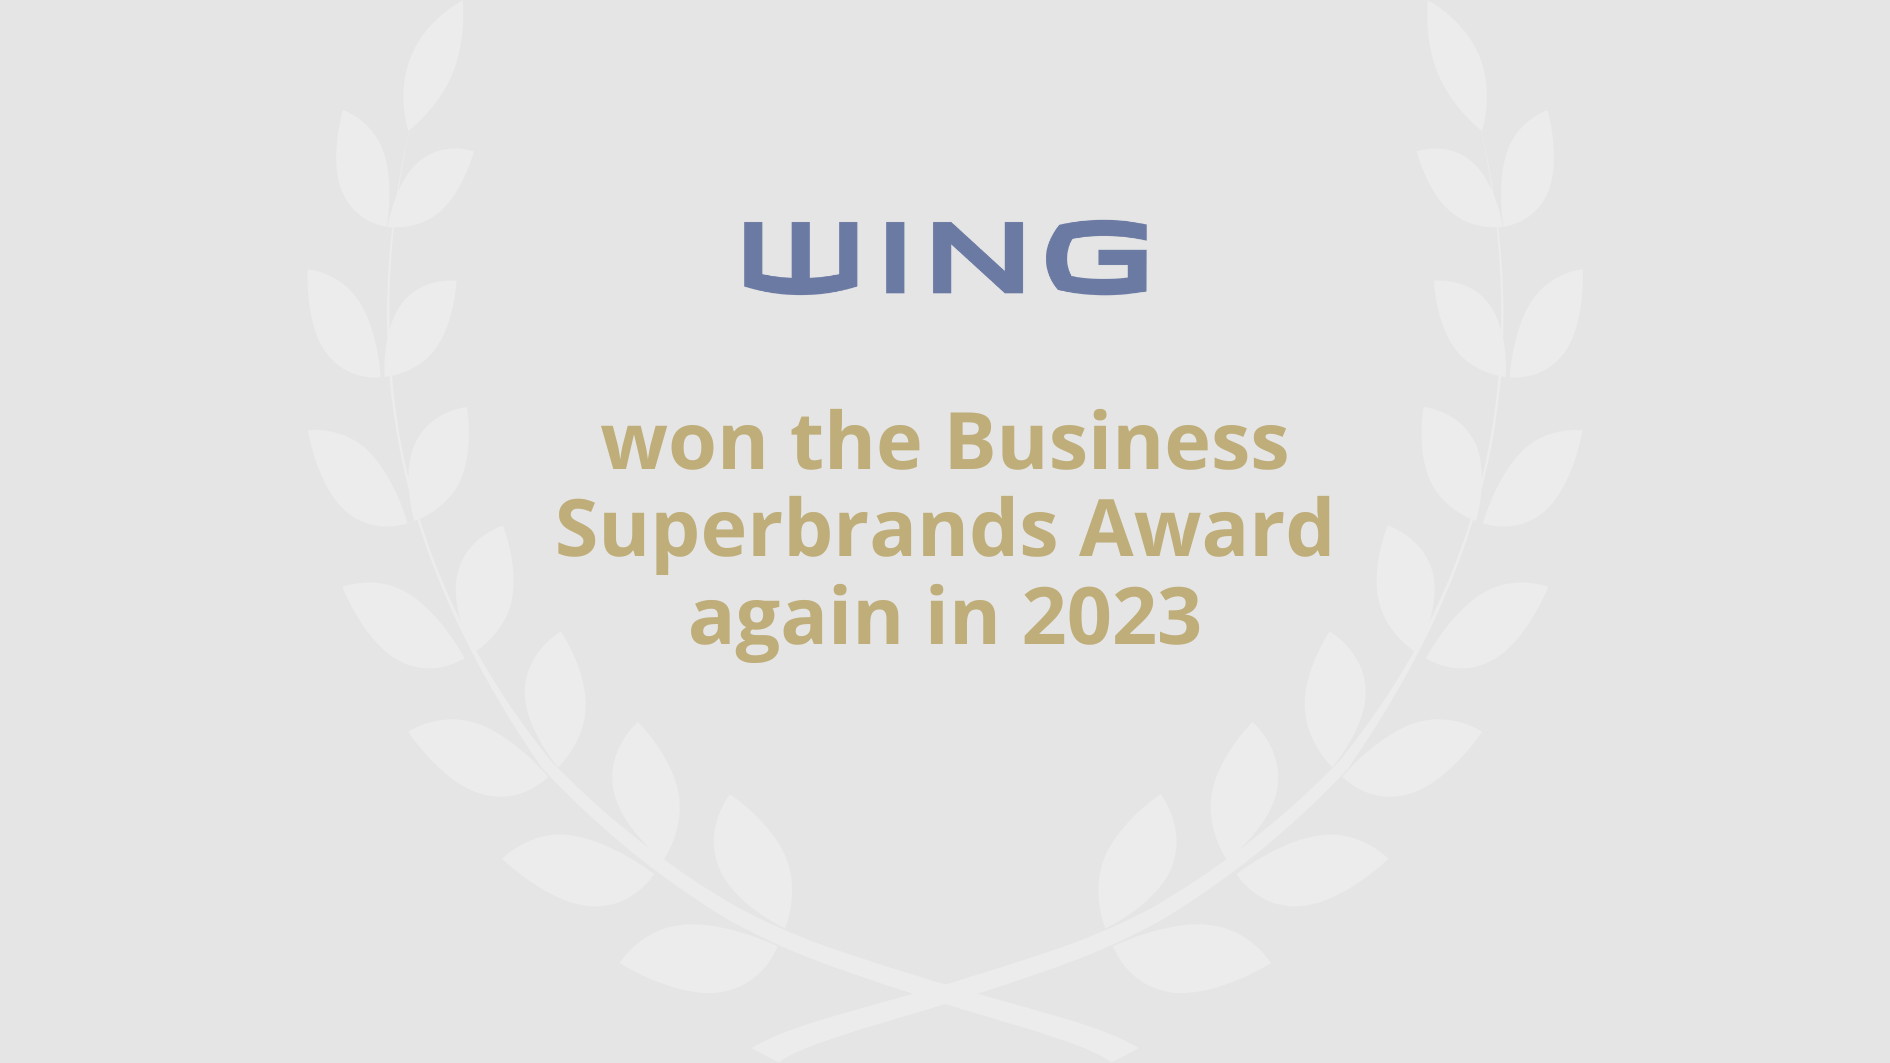 WING won the Business Superbrands Award again in 2023